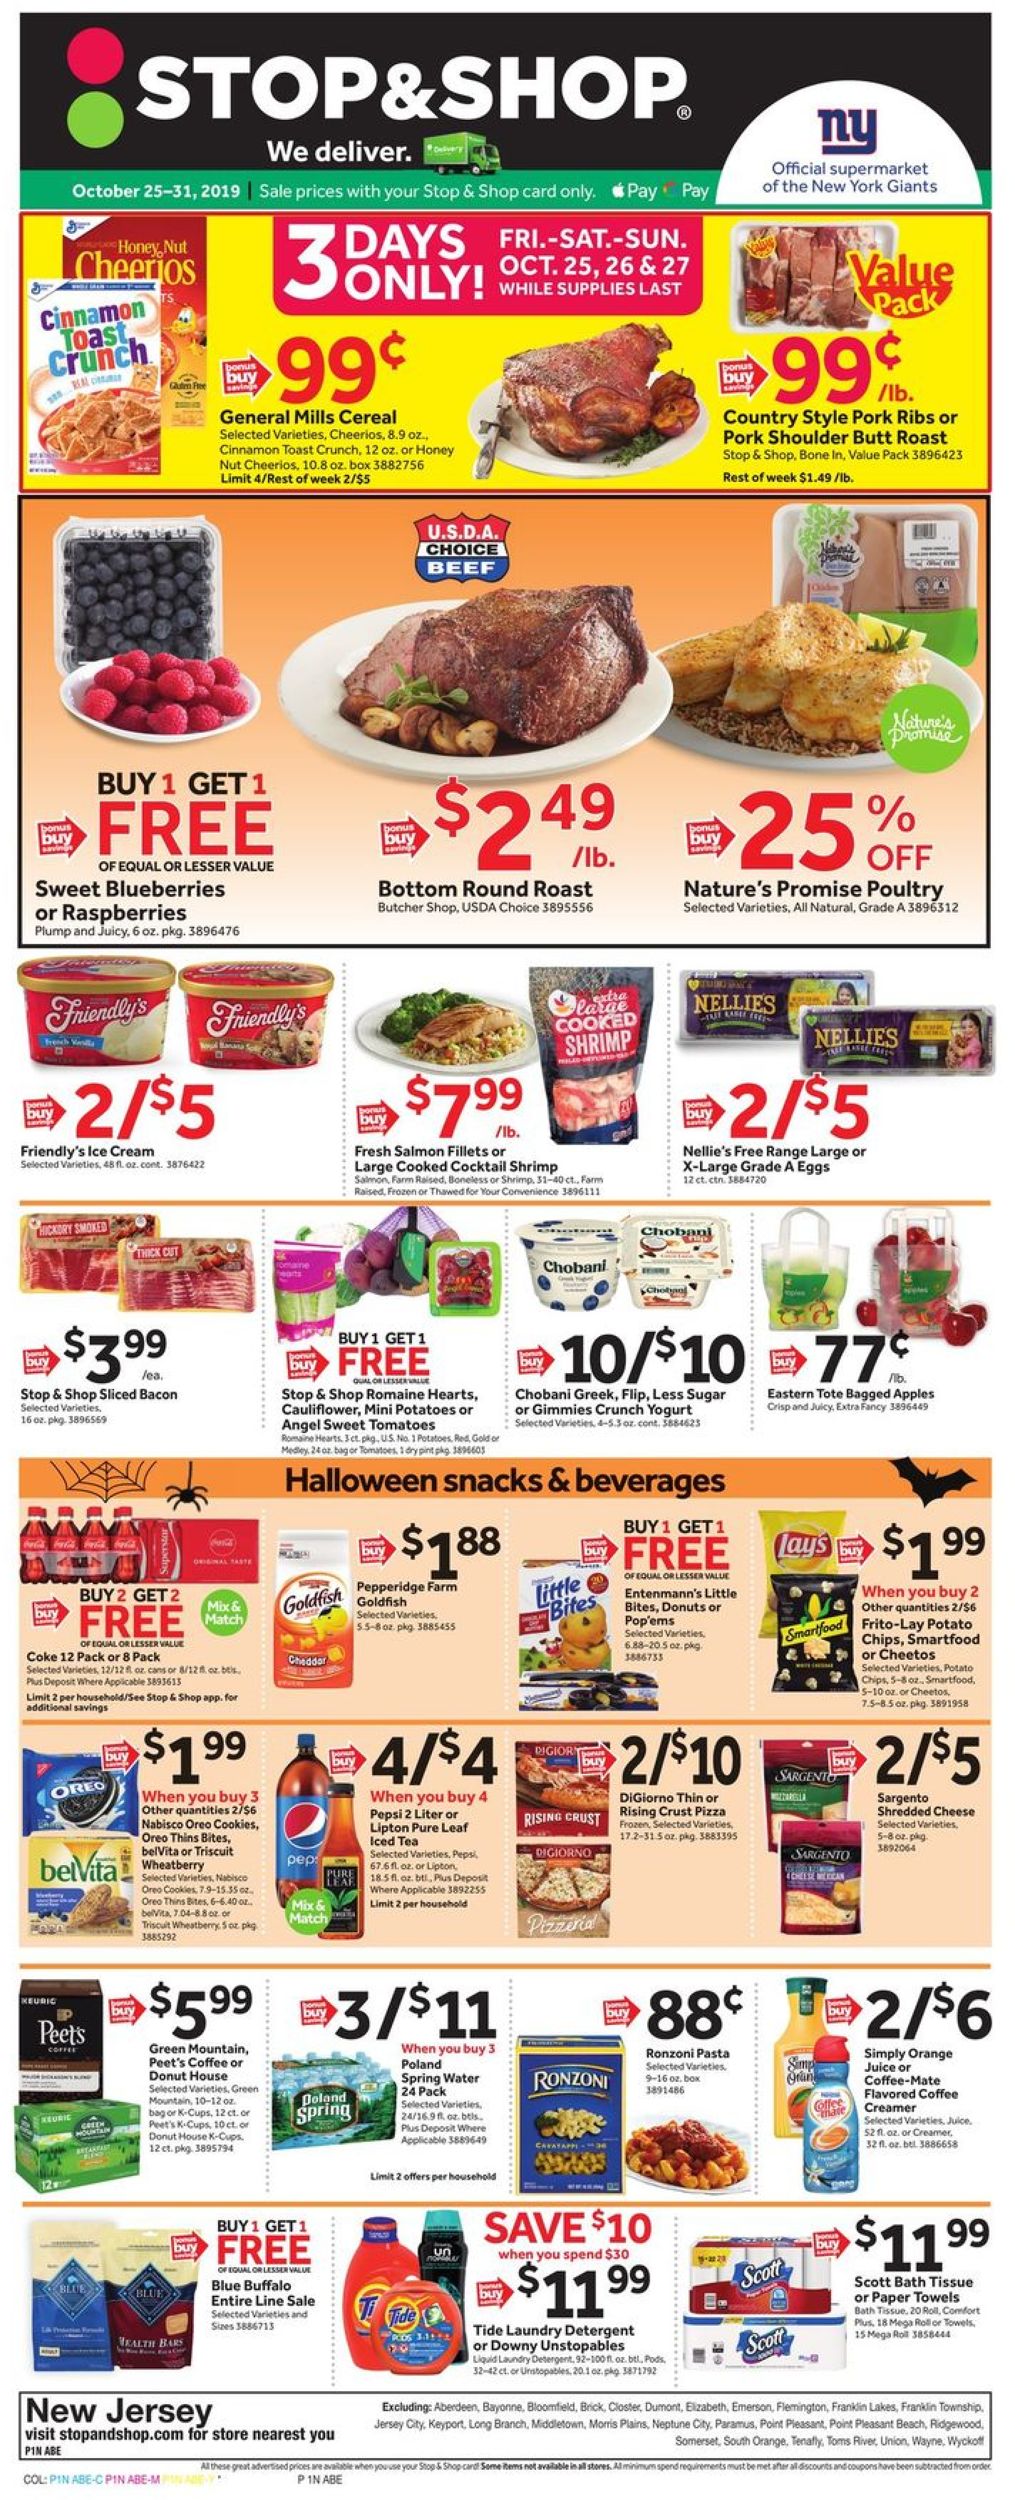 Stop and Shop Current weekly ad 10/25 - 10/31/2019 - frequent-ads.com